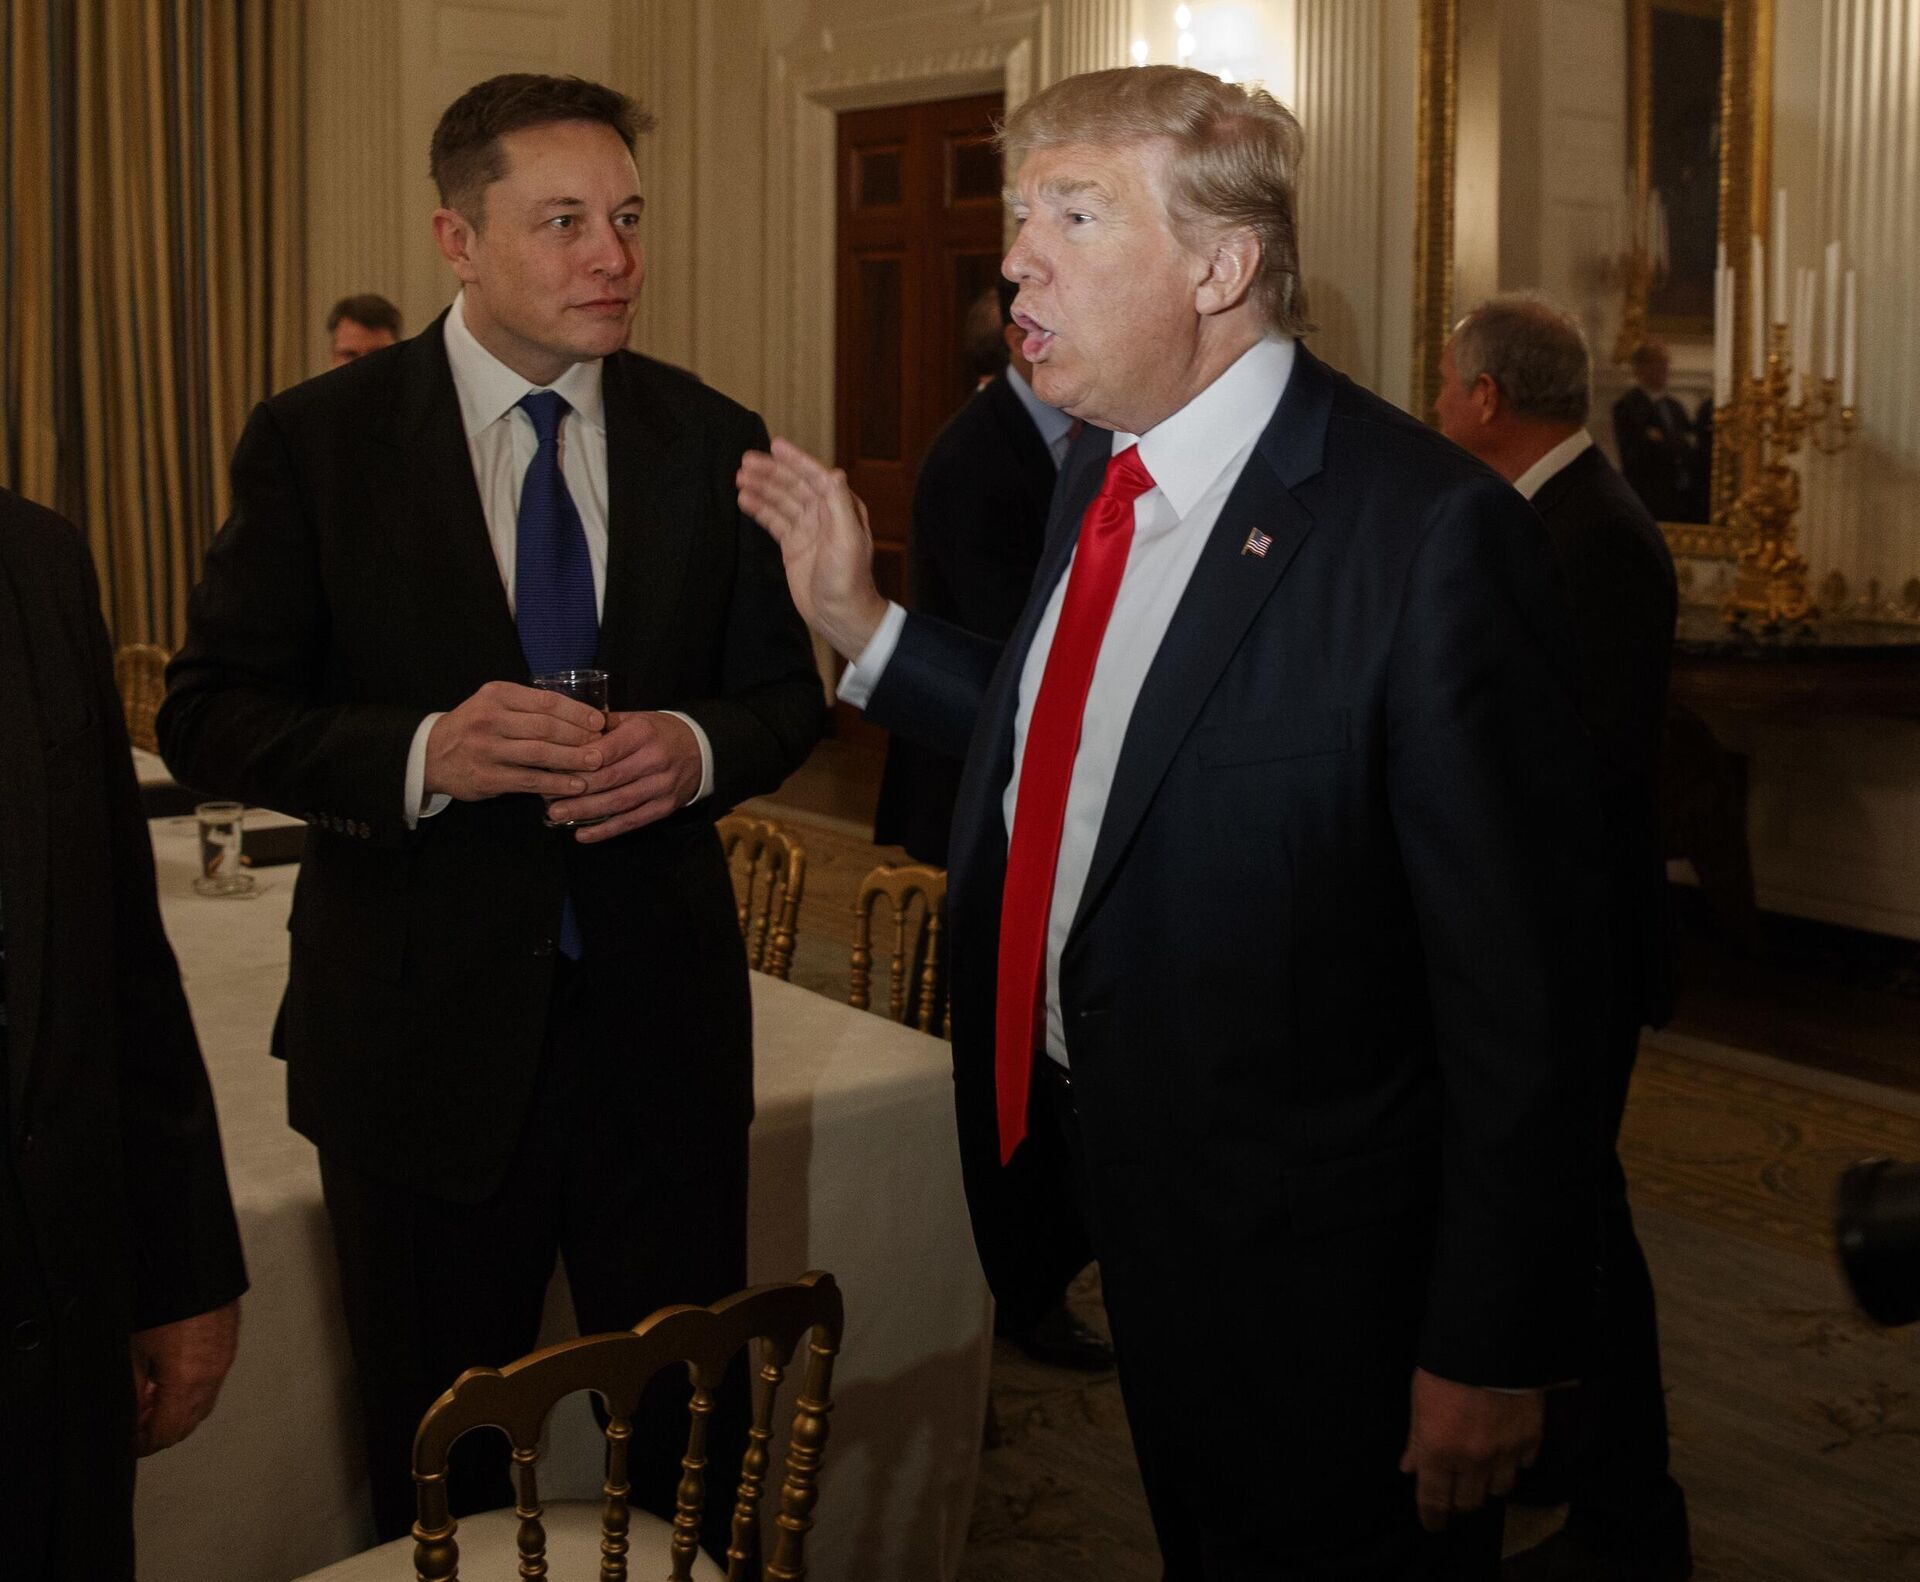 President Donald Trump talks with Tesla and SpaceX CEO Elon Musk, center, and White House chief strategist Steve Bannon during a meeting with business leaders in the State Dining Room of the White House in Washington, Friday, Feb. 3, 2017 - Sputnik International, 1920, 29.12.2022